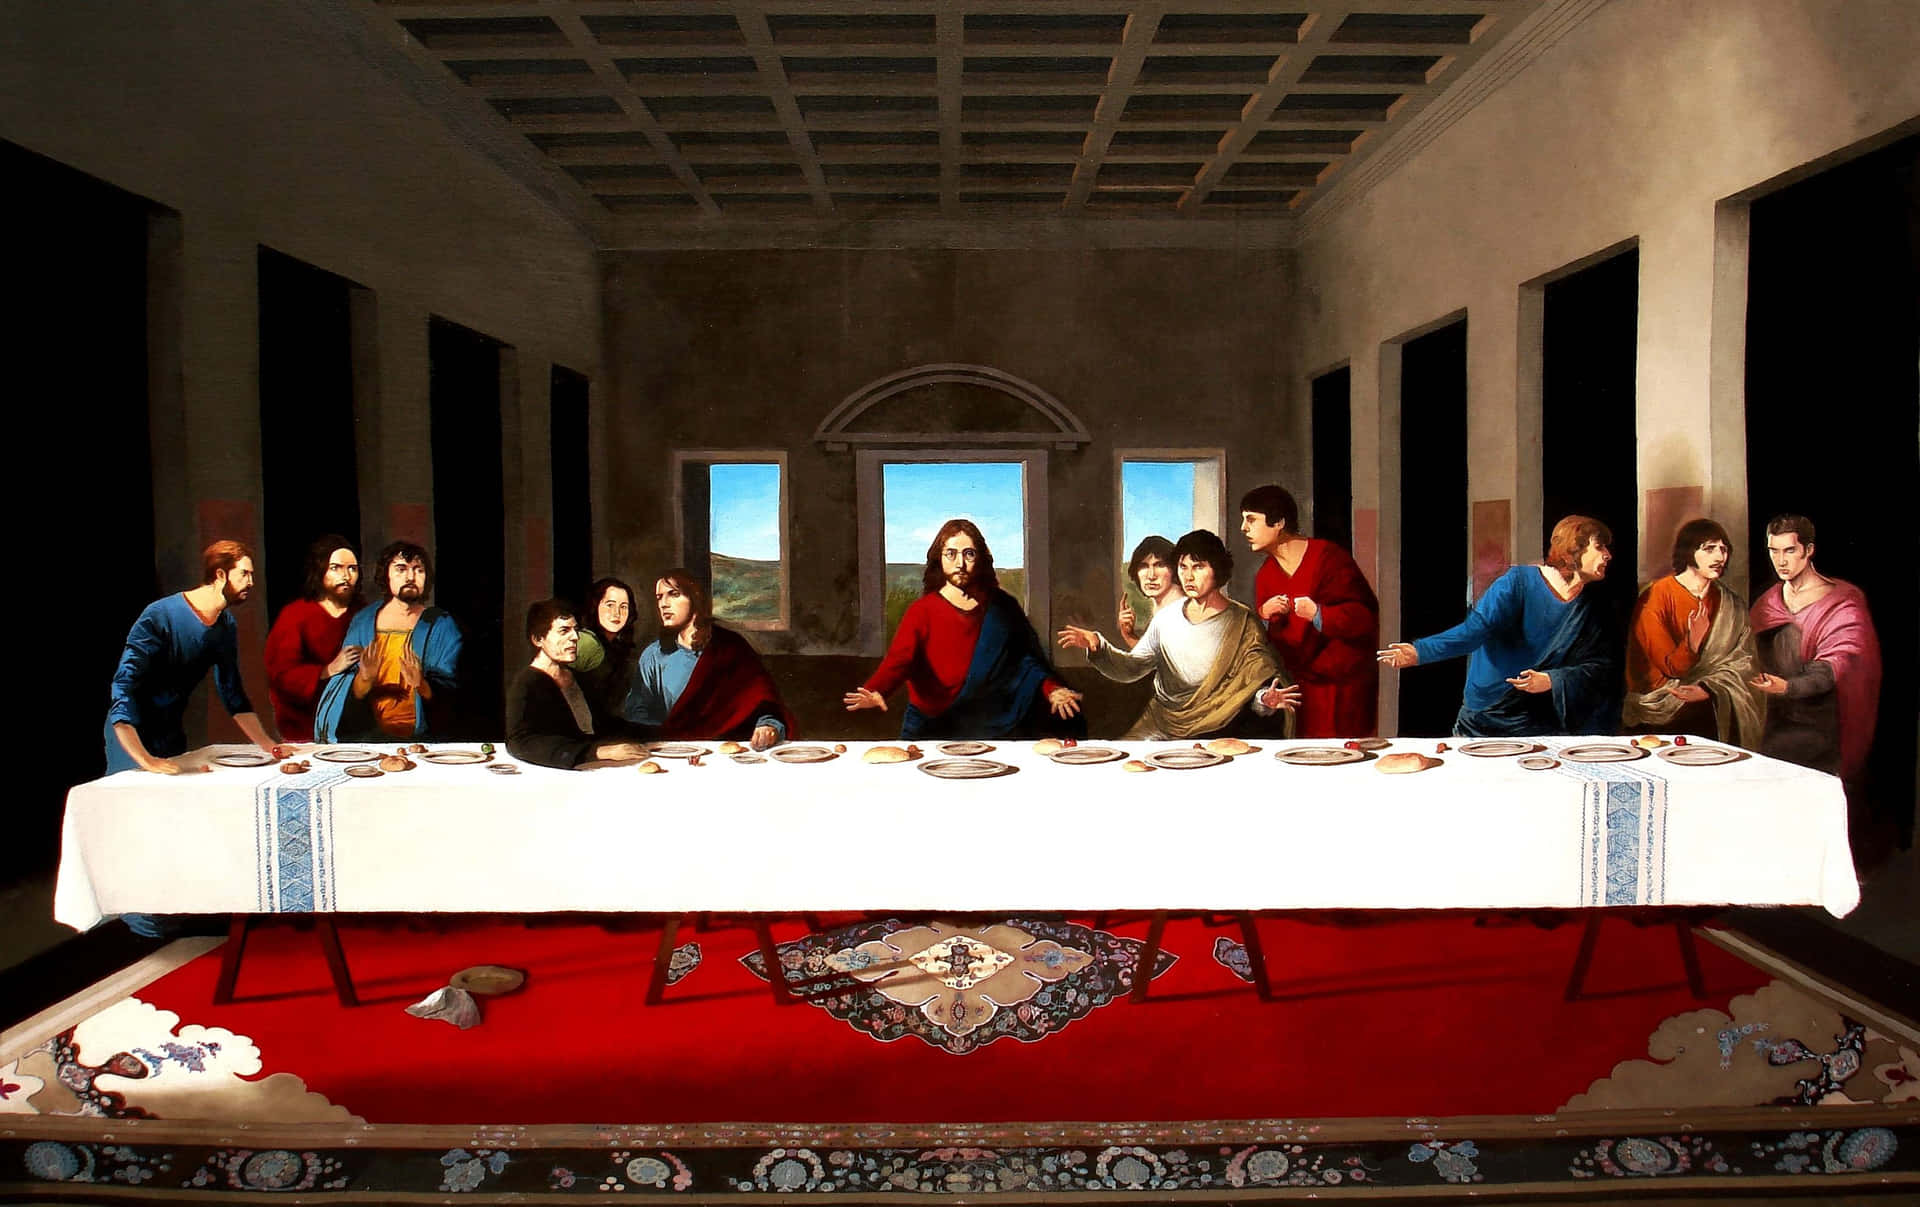 [100+] The Last Supper Wallpapers | Wallpapers.com